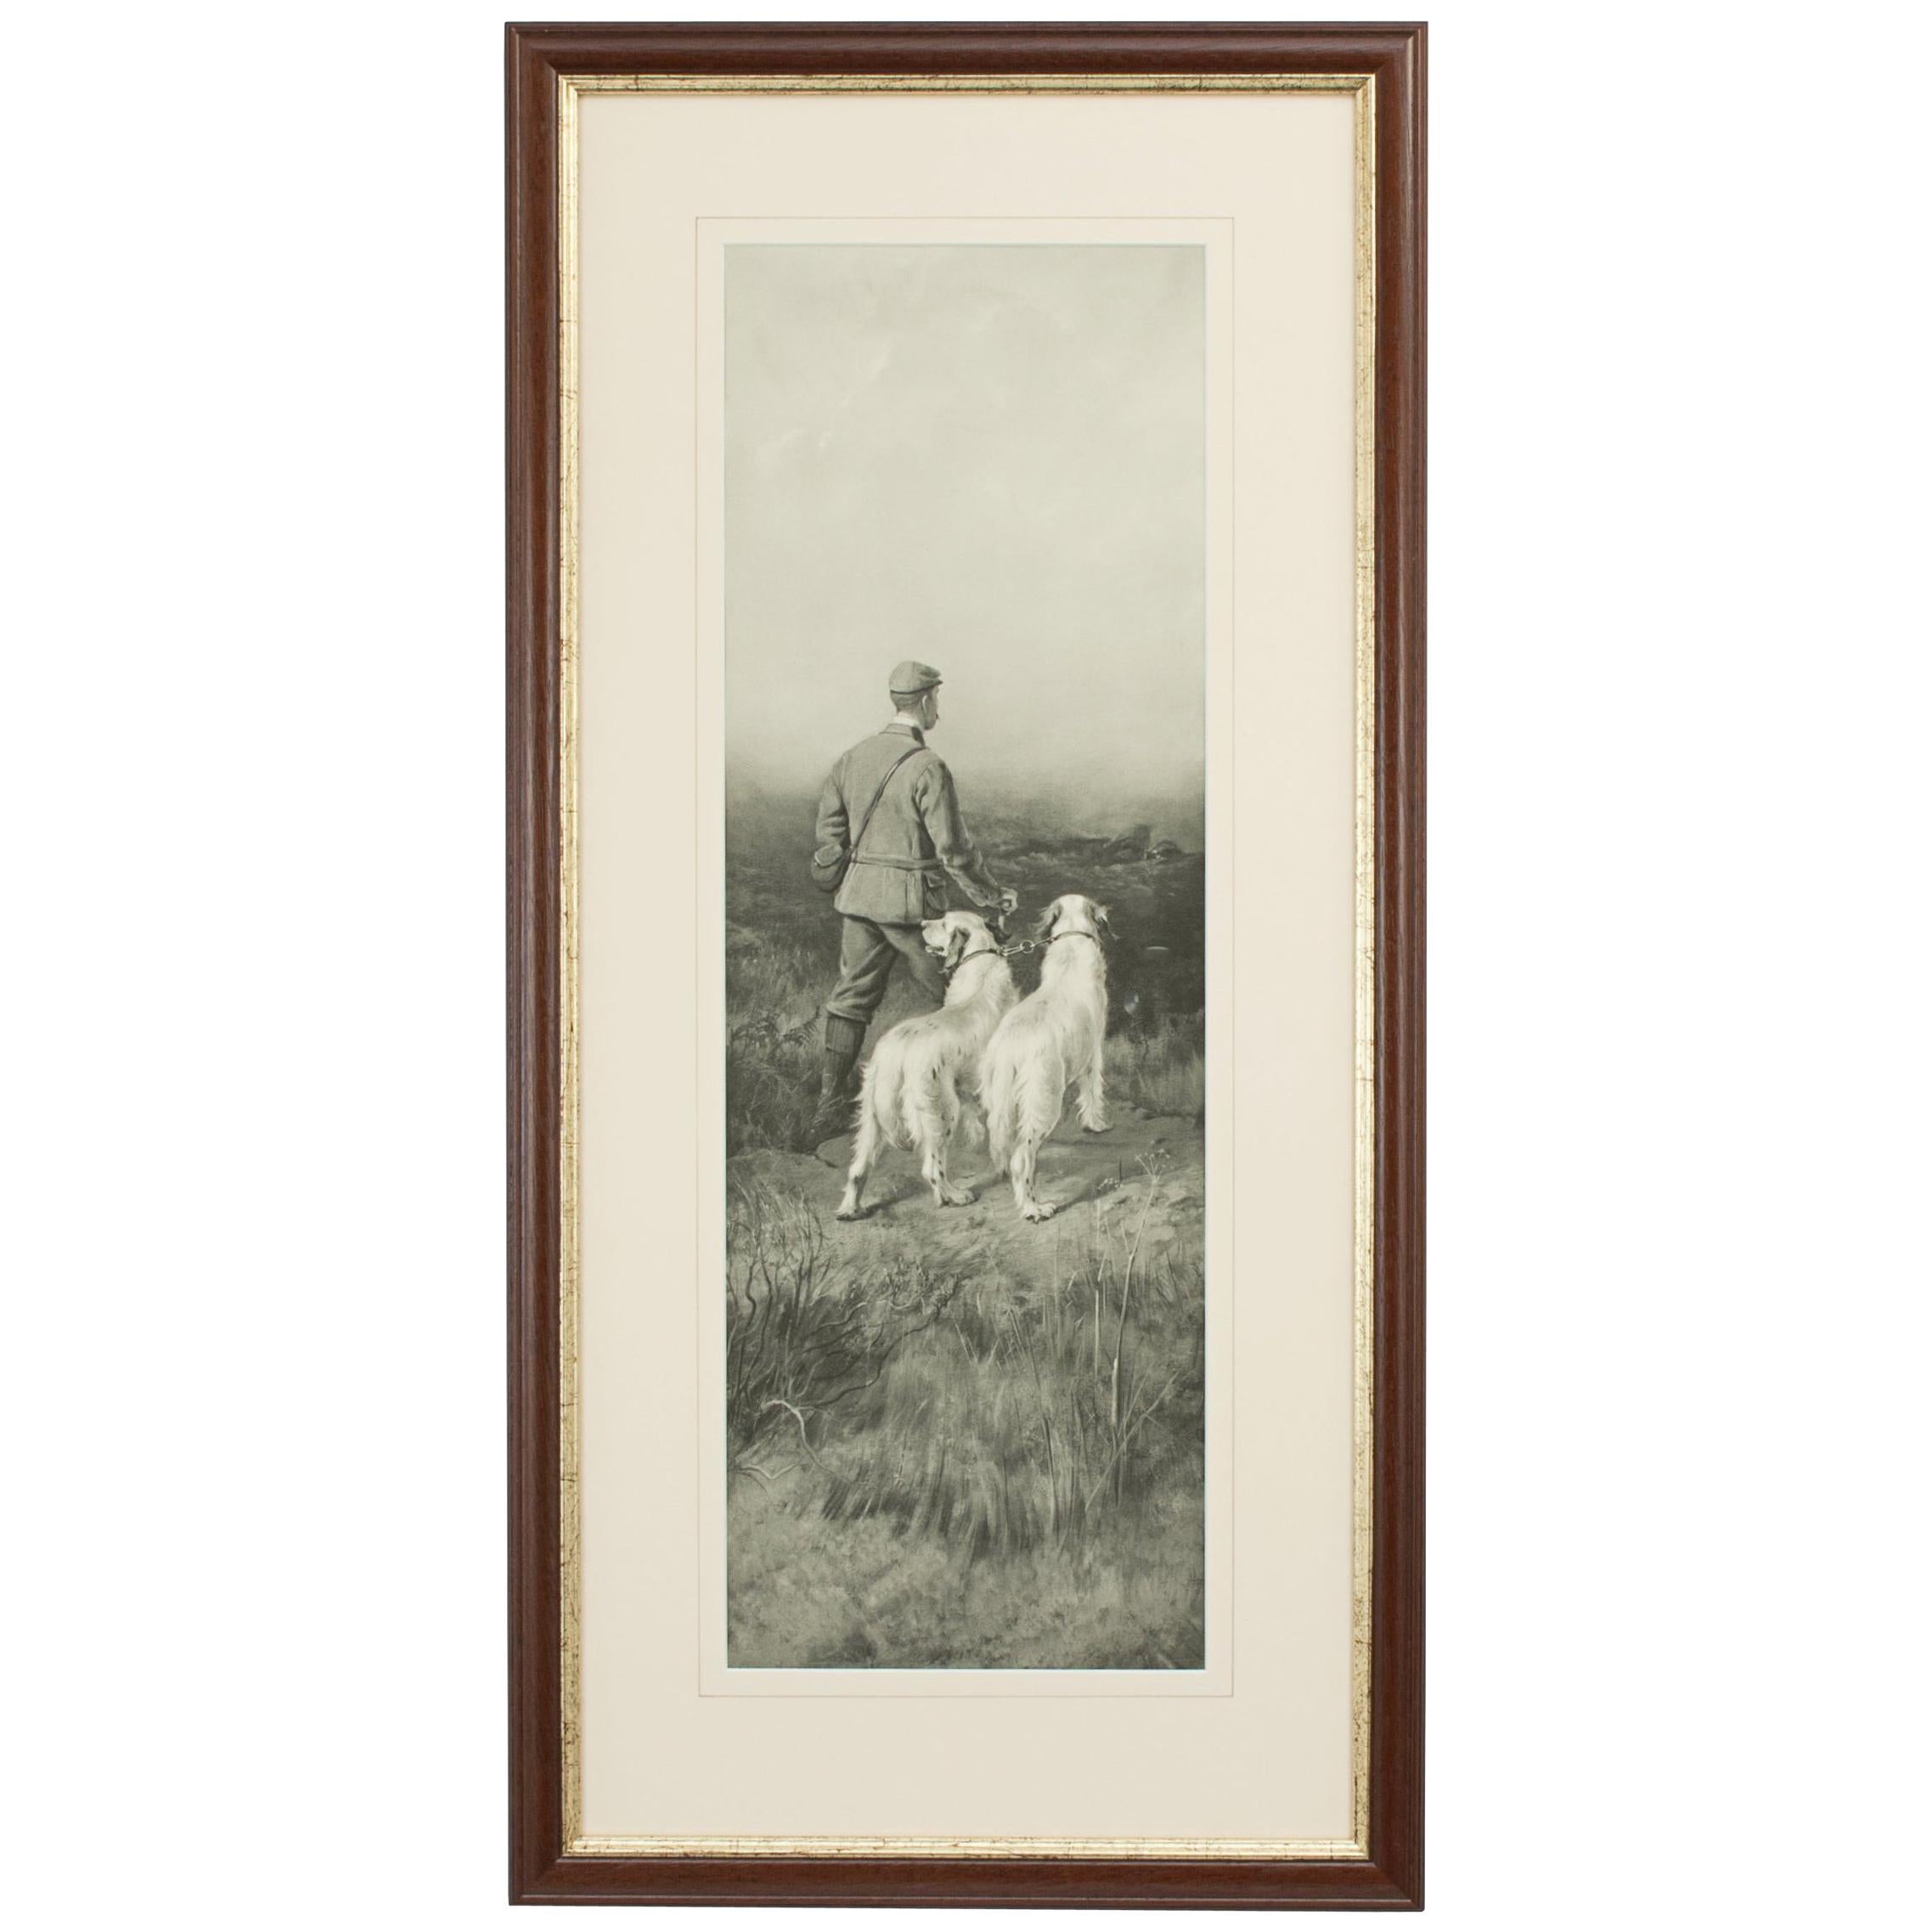 Antique Shooting Print by George Earl, First Beat